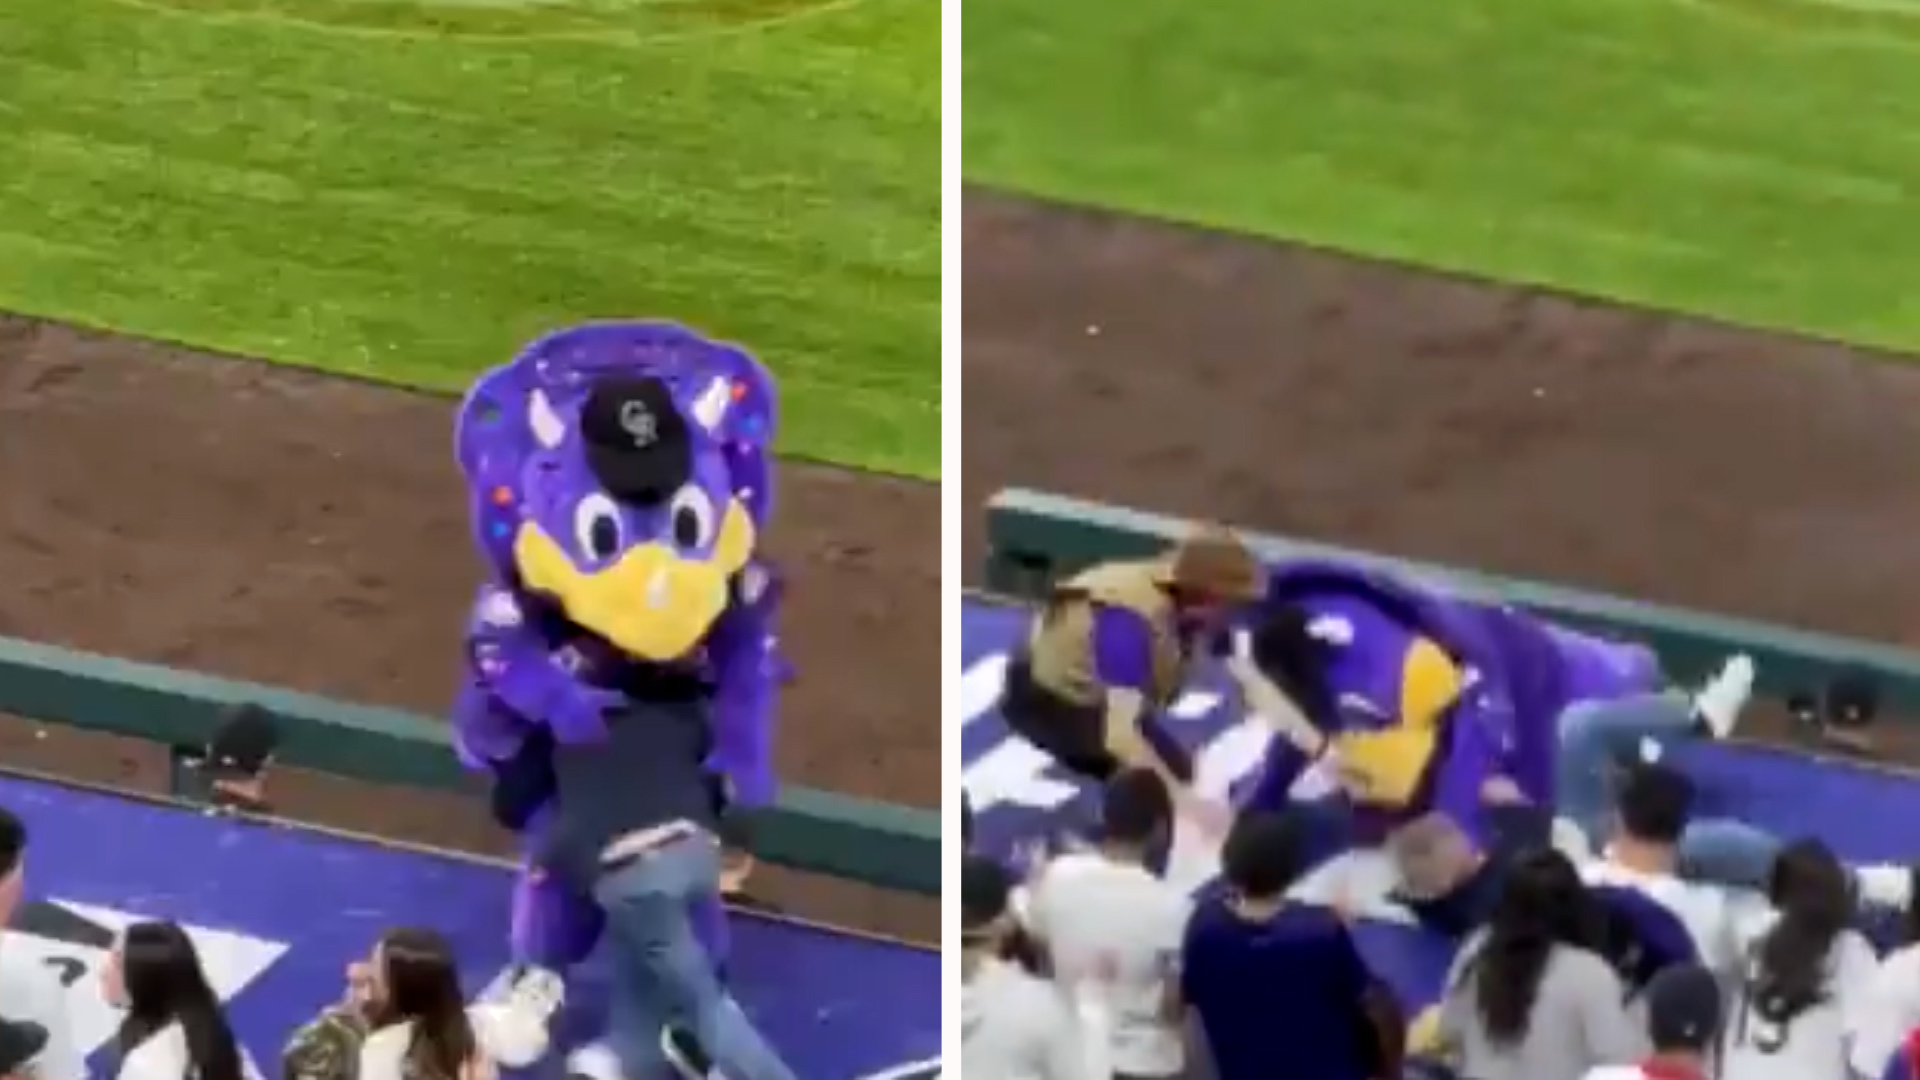 Police searching for man who brutally tackled mascot during Colorado Rockies game